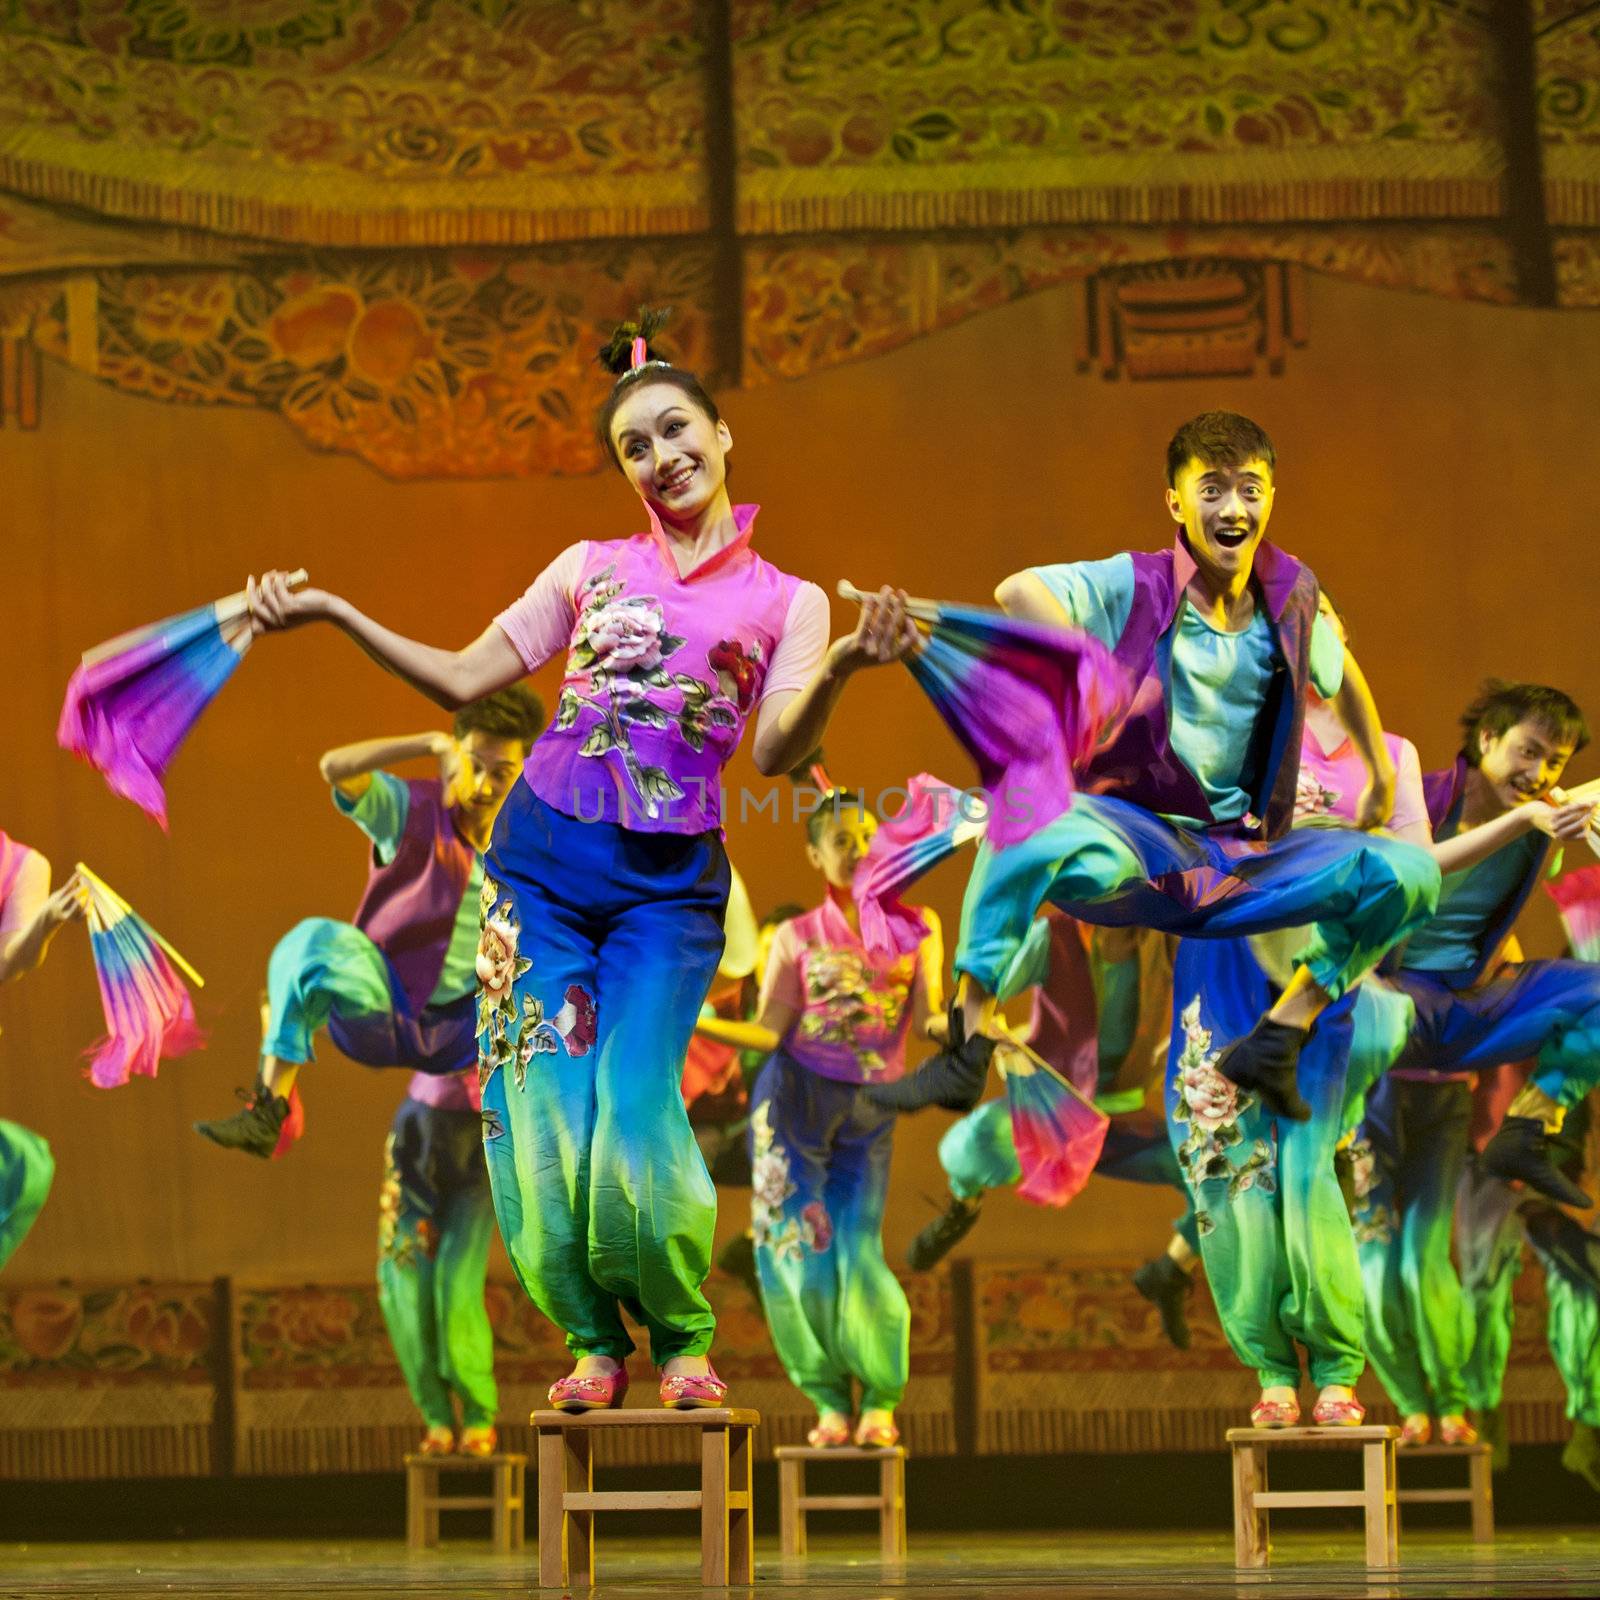 CHENGDU - OCT 17: Chinese national dancers perform folk dance on stage at JINCHENG theater on Oct 17, 2011 in Chengdu, China.